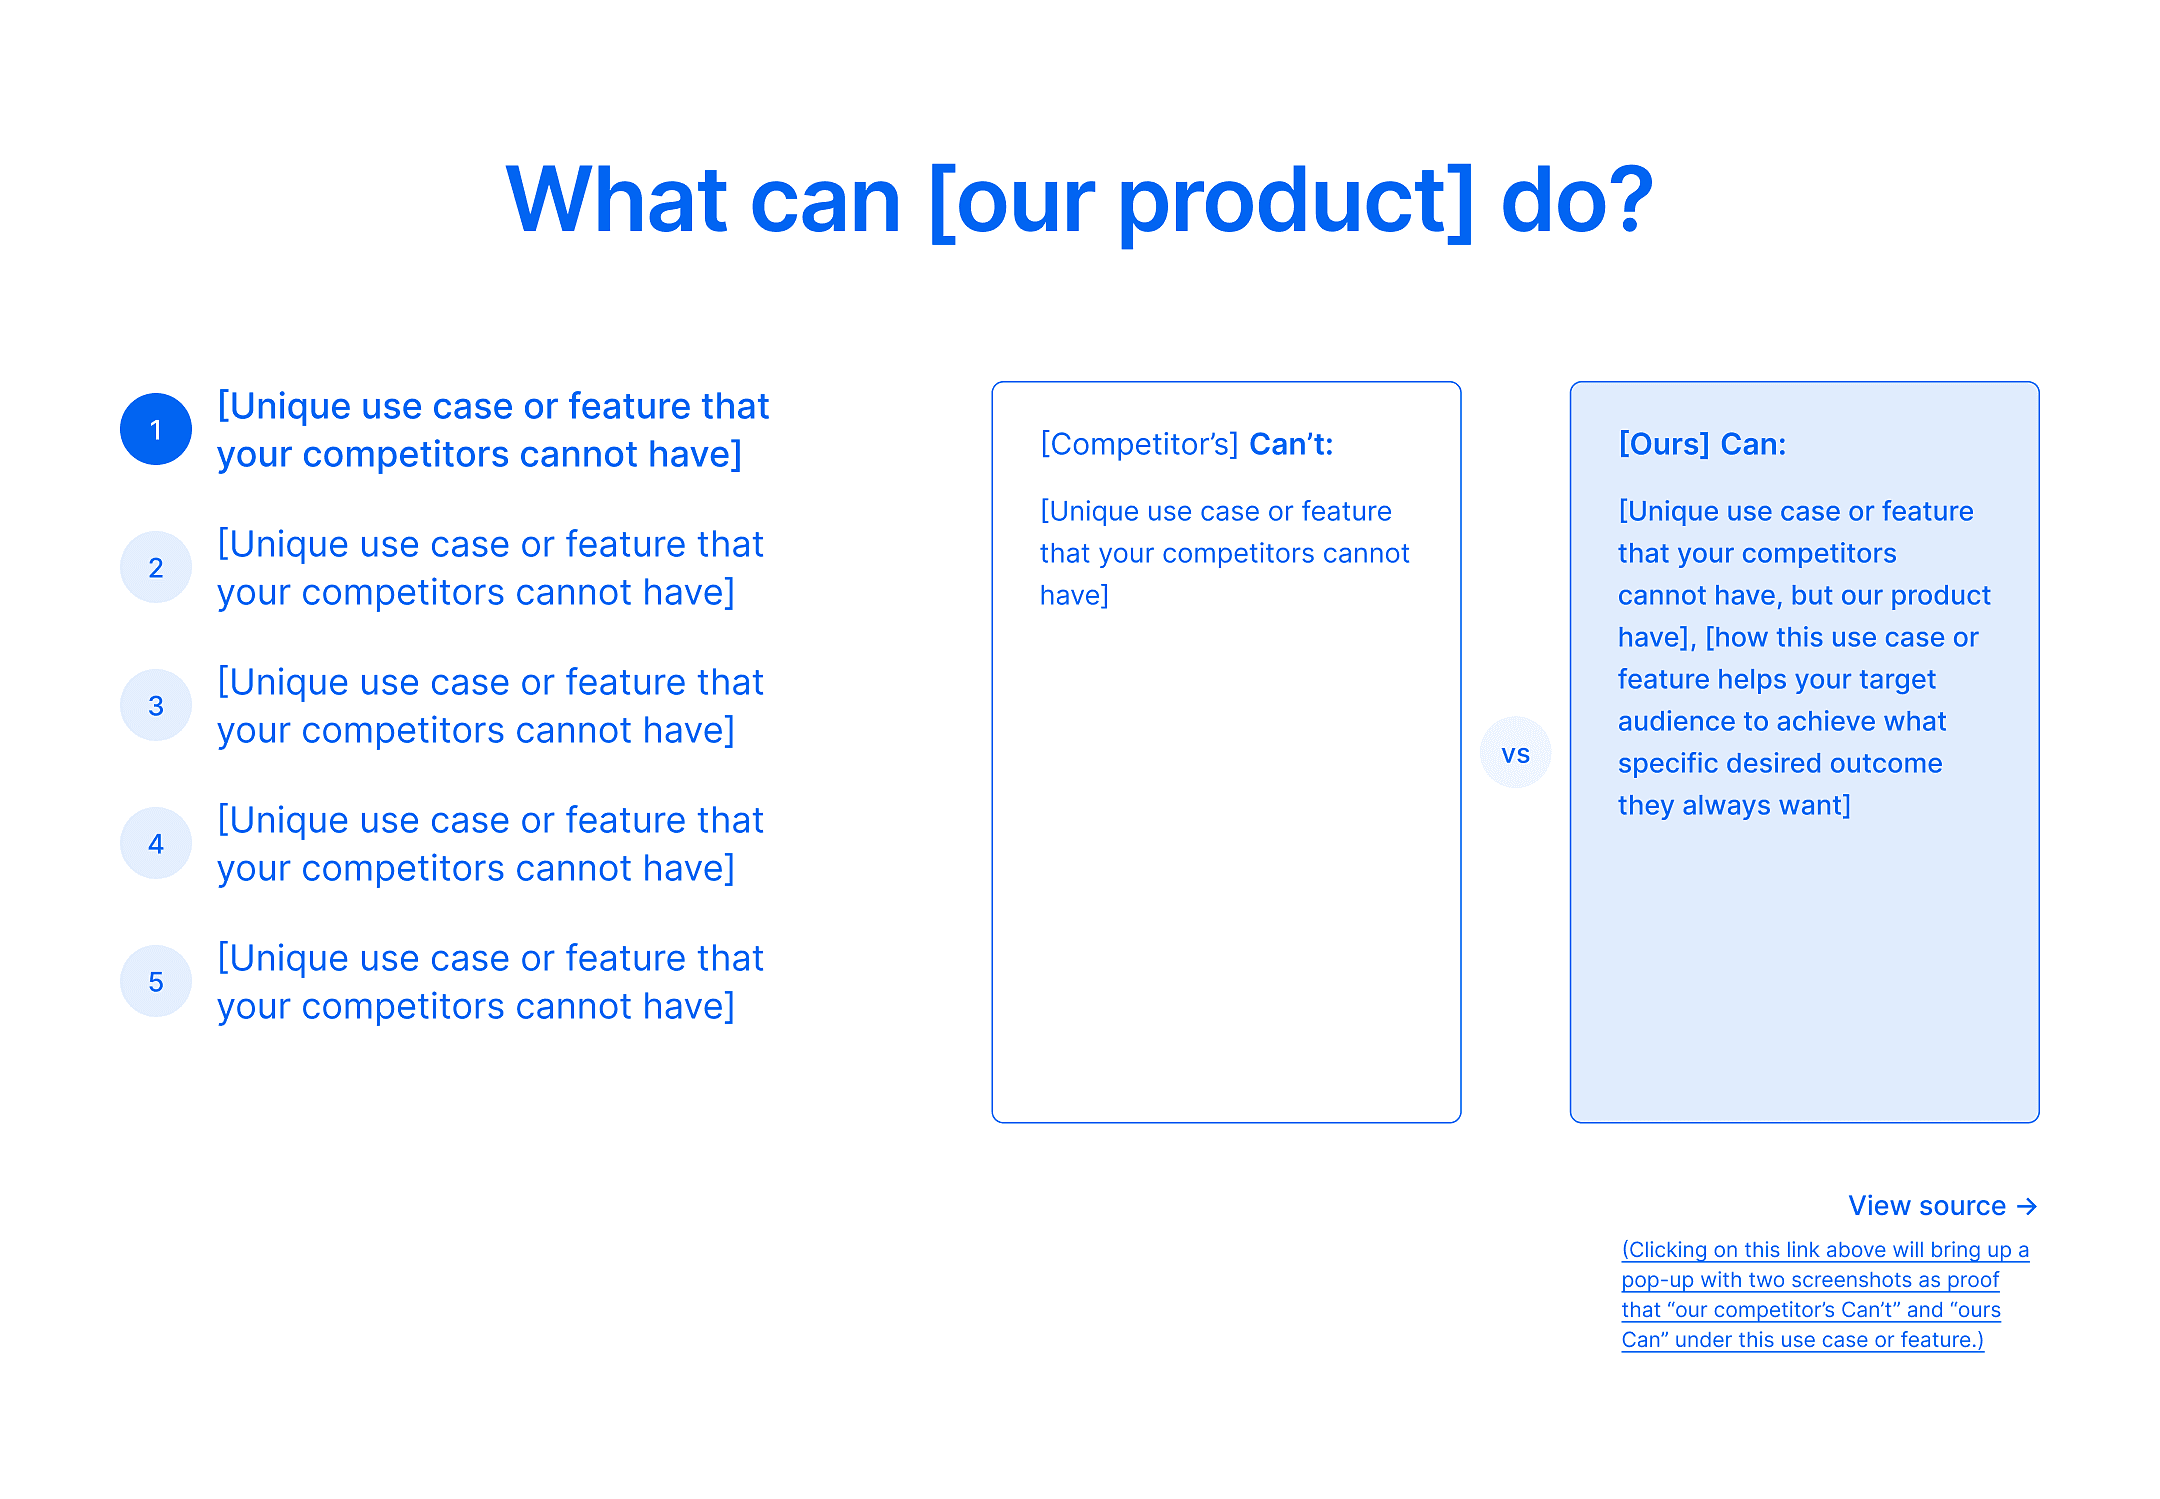 Blueprint of detailed comparison of different use cases